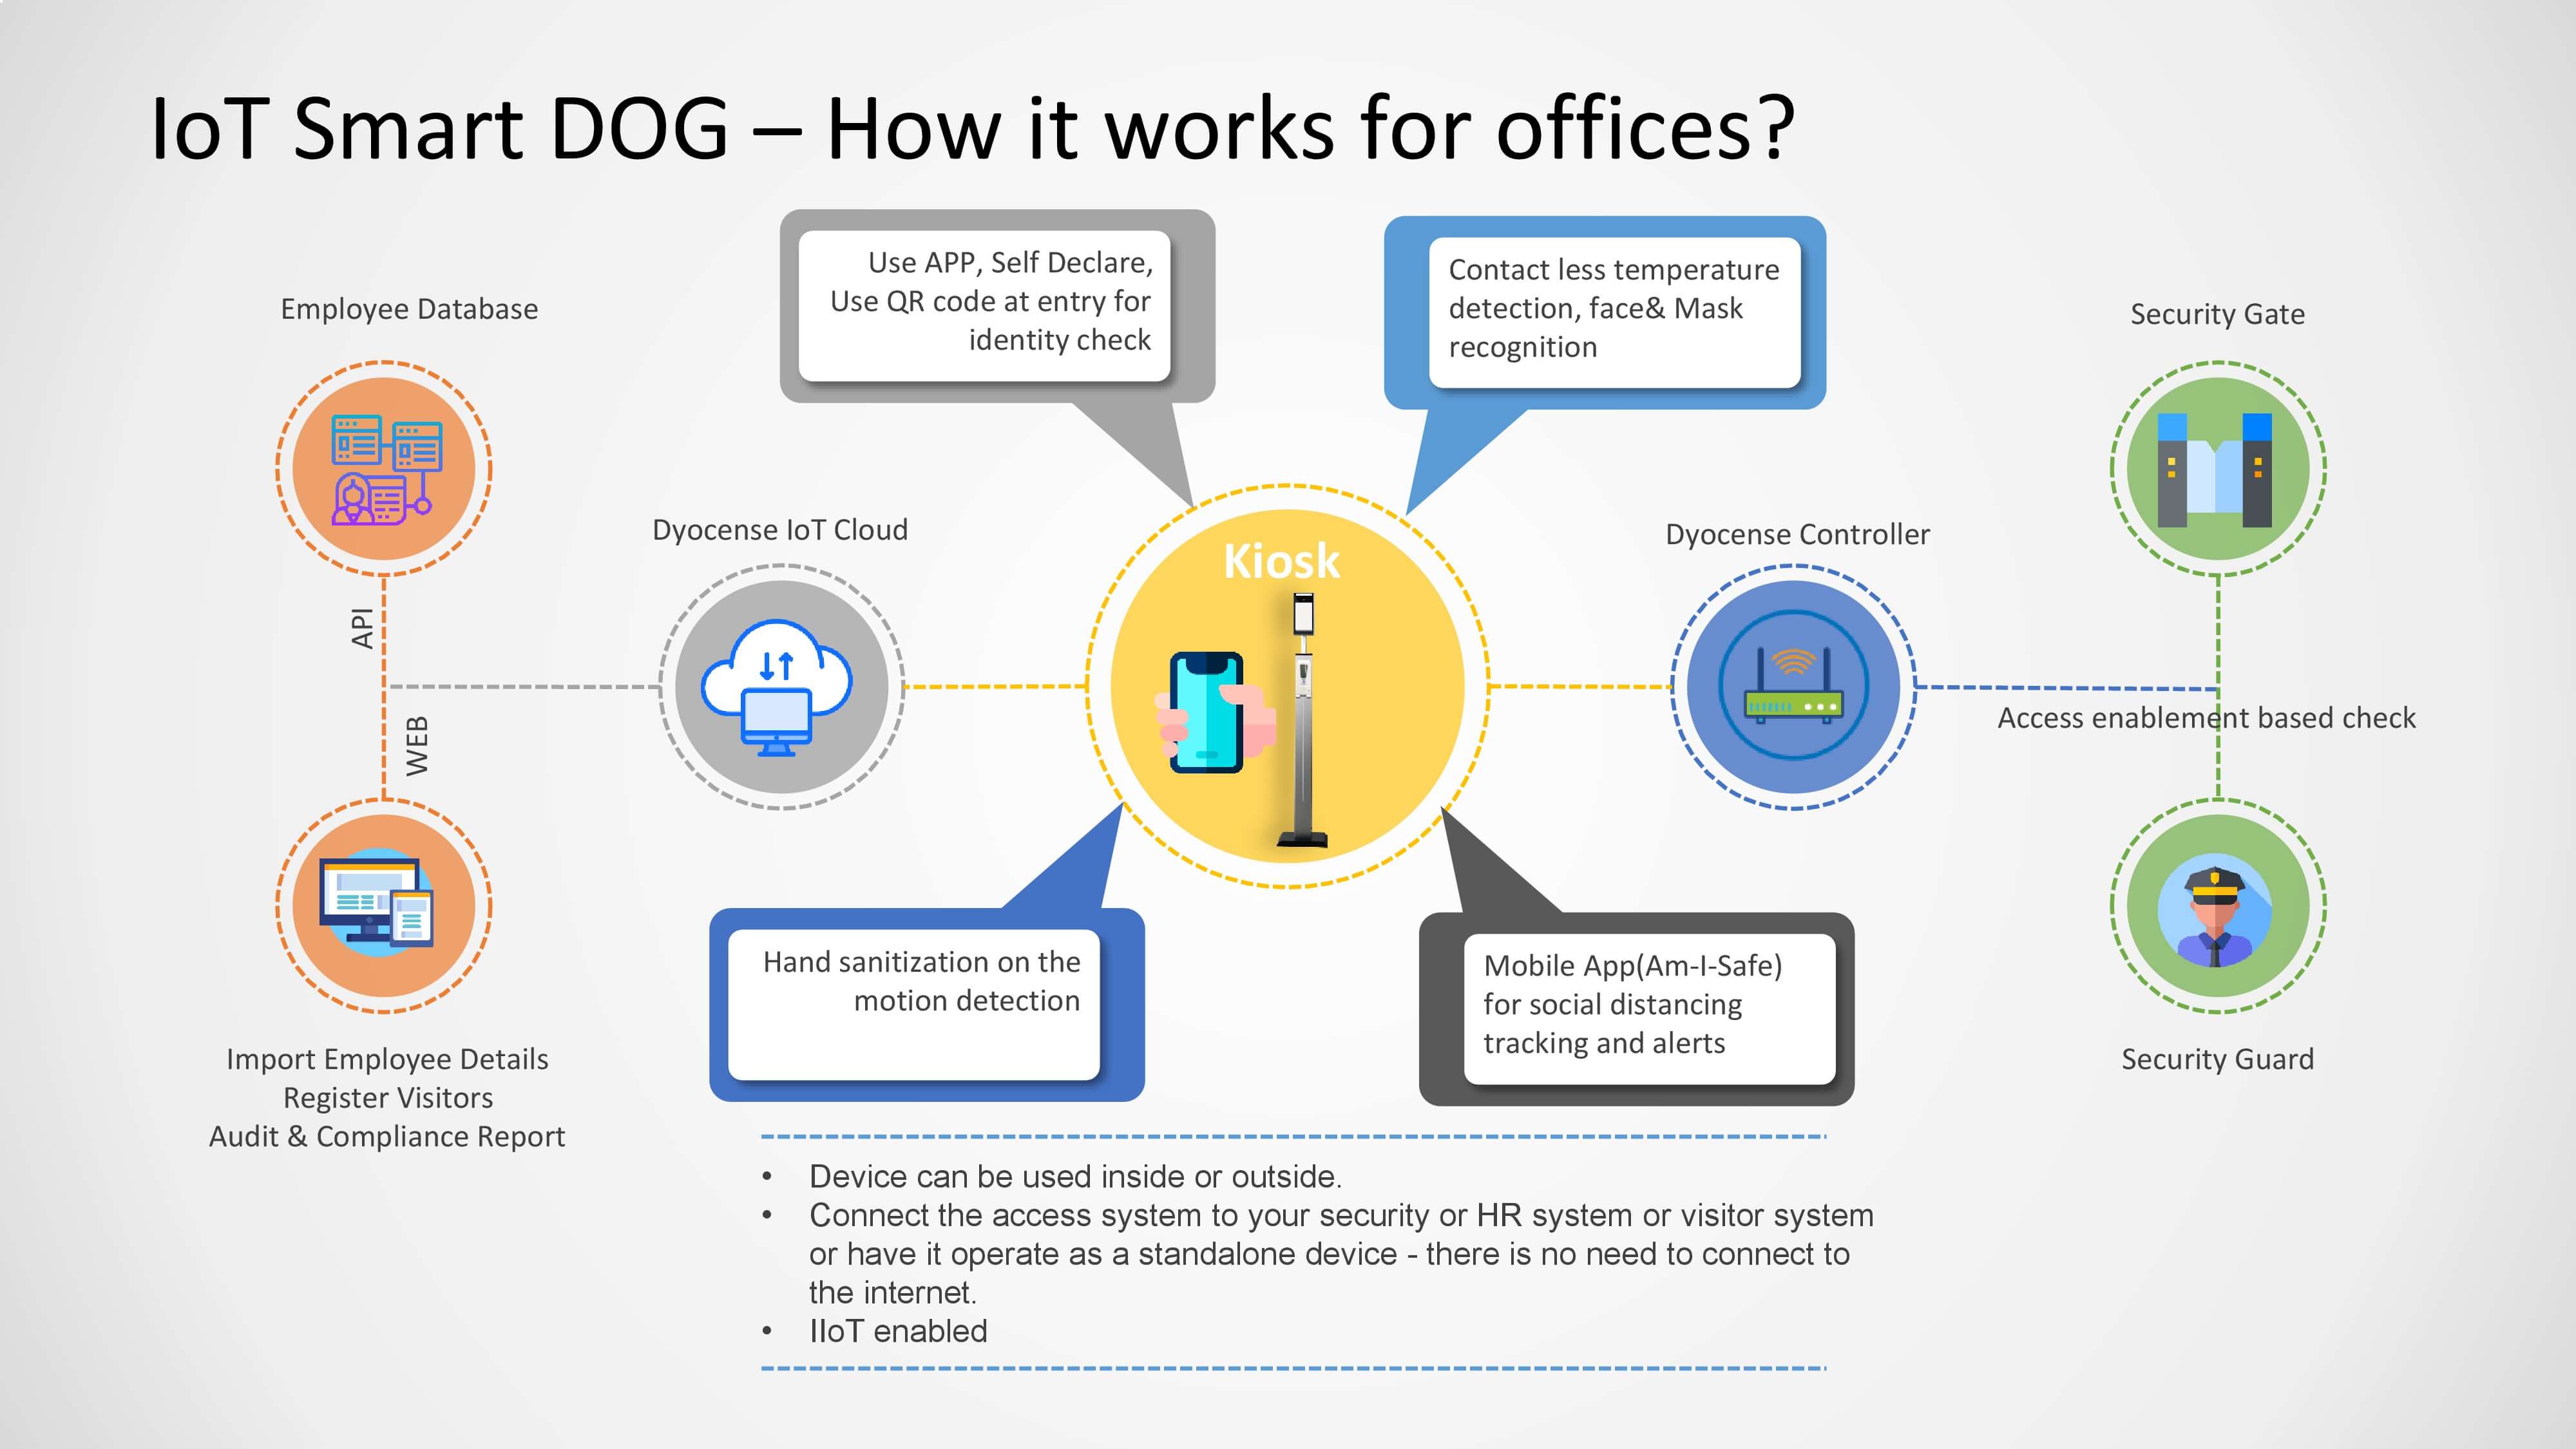 DyoCense IoT smart dog for Offices poster